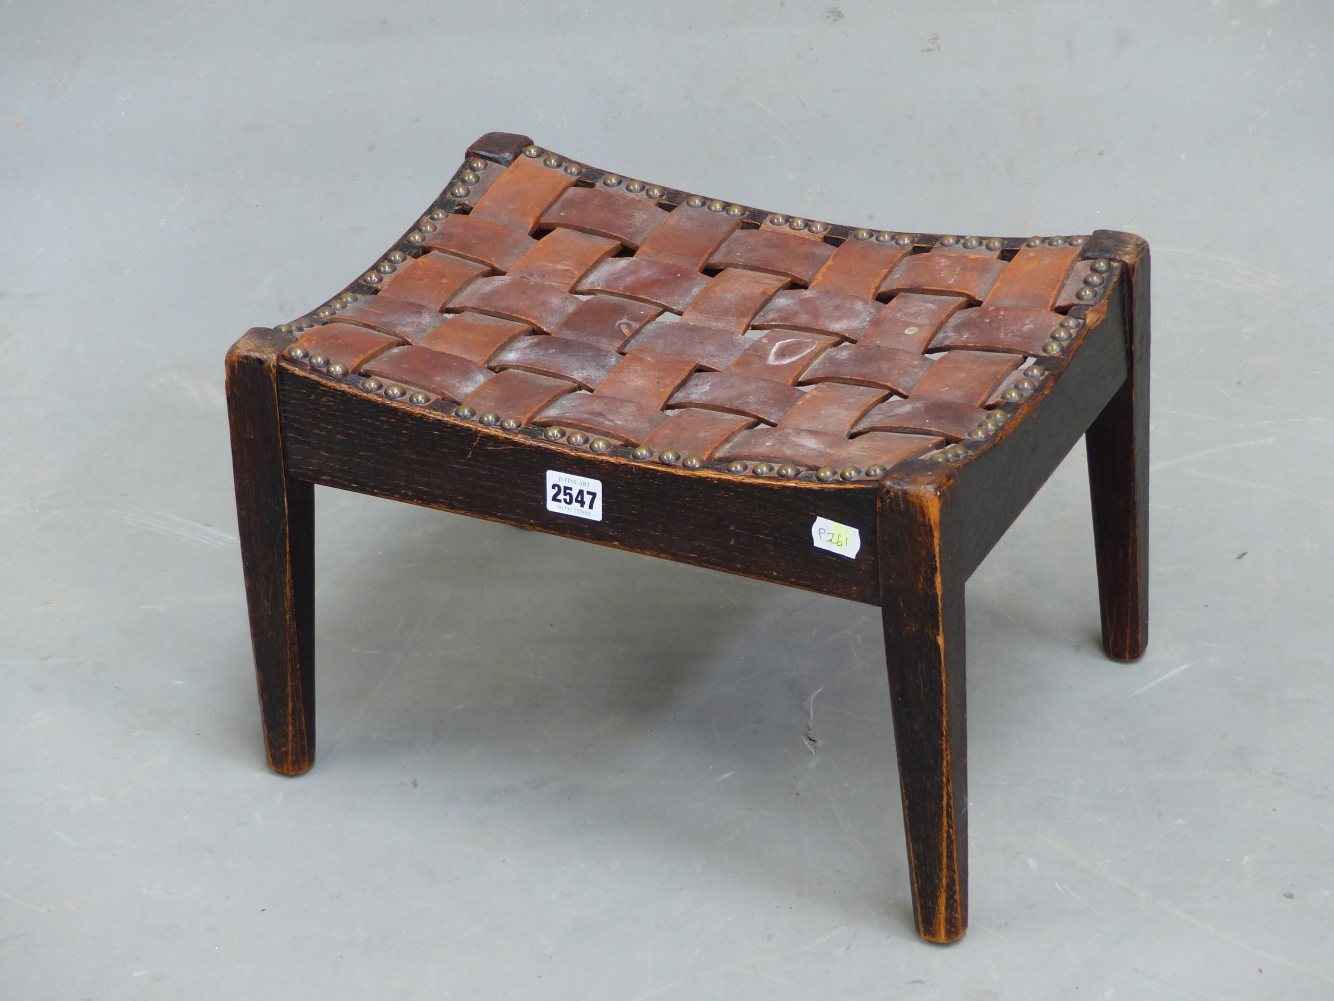 A SIMPSON OF KENDAL OAK STOOL WITH INTERWOVEN LEATHER STRAP WORK SEAT. W 40 x D 30.5 x H 25.5cms.